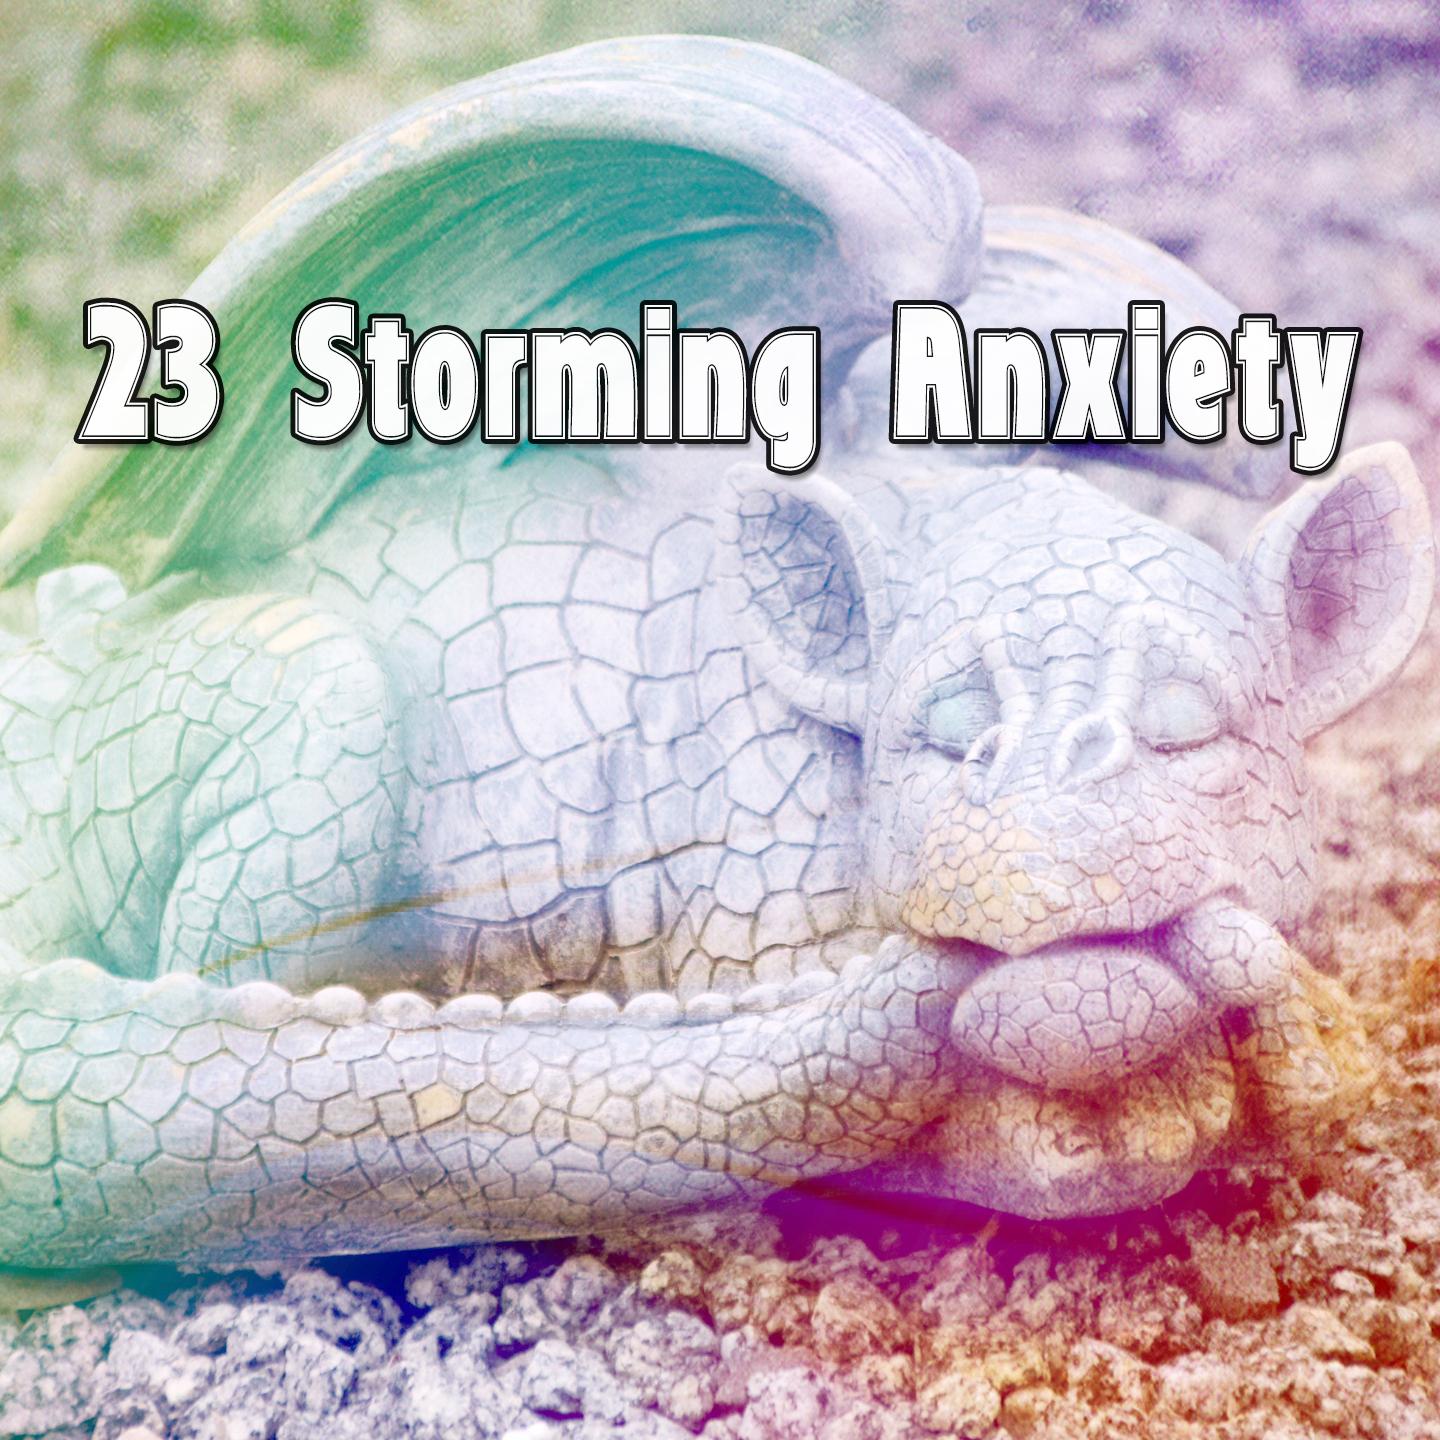 23 Storming Anxiety